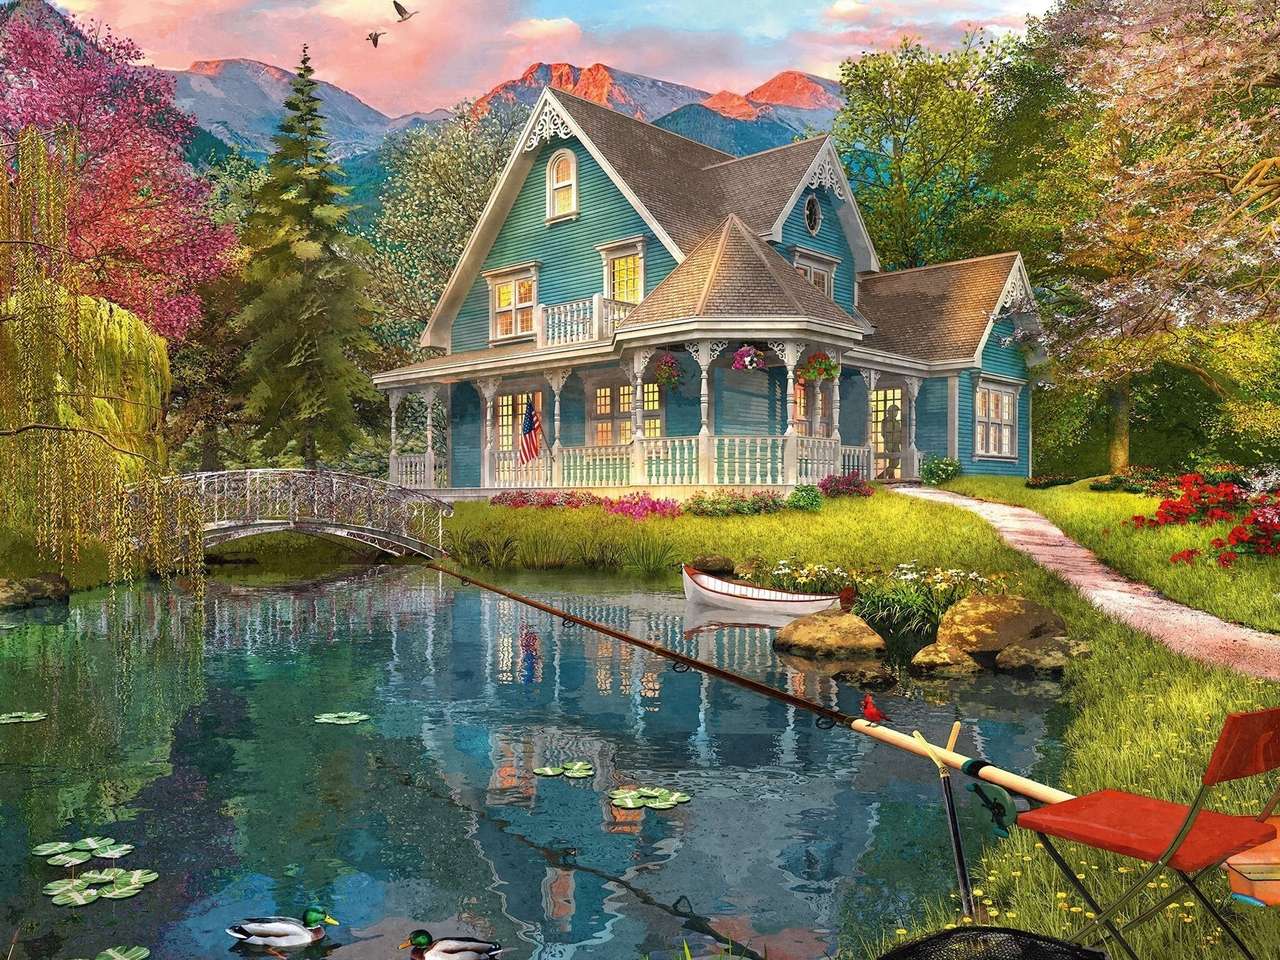 Cottage in the mountains by the pond jigsaw puzzle